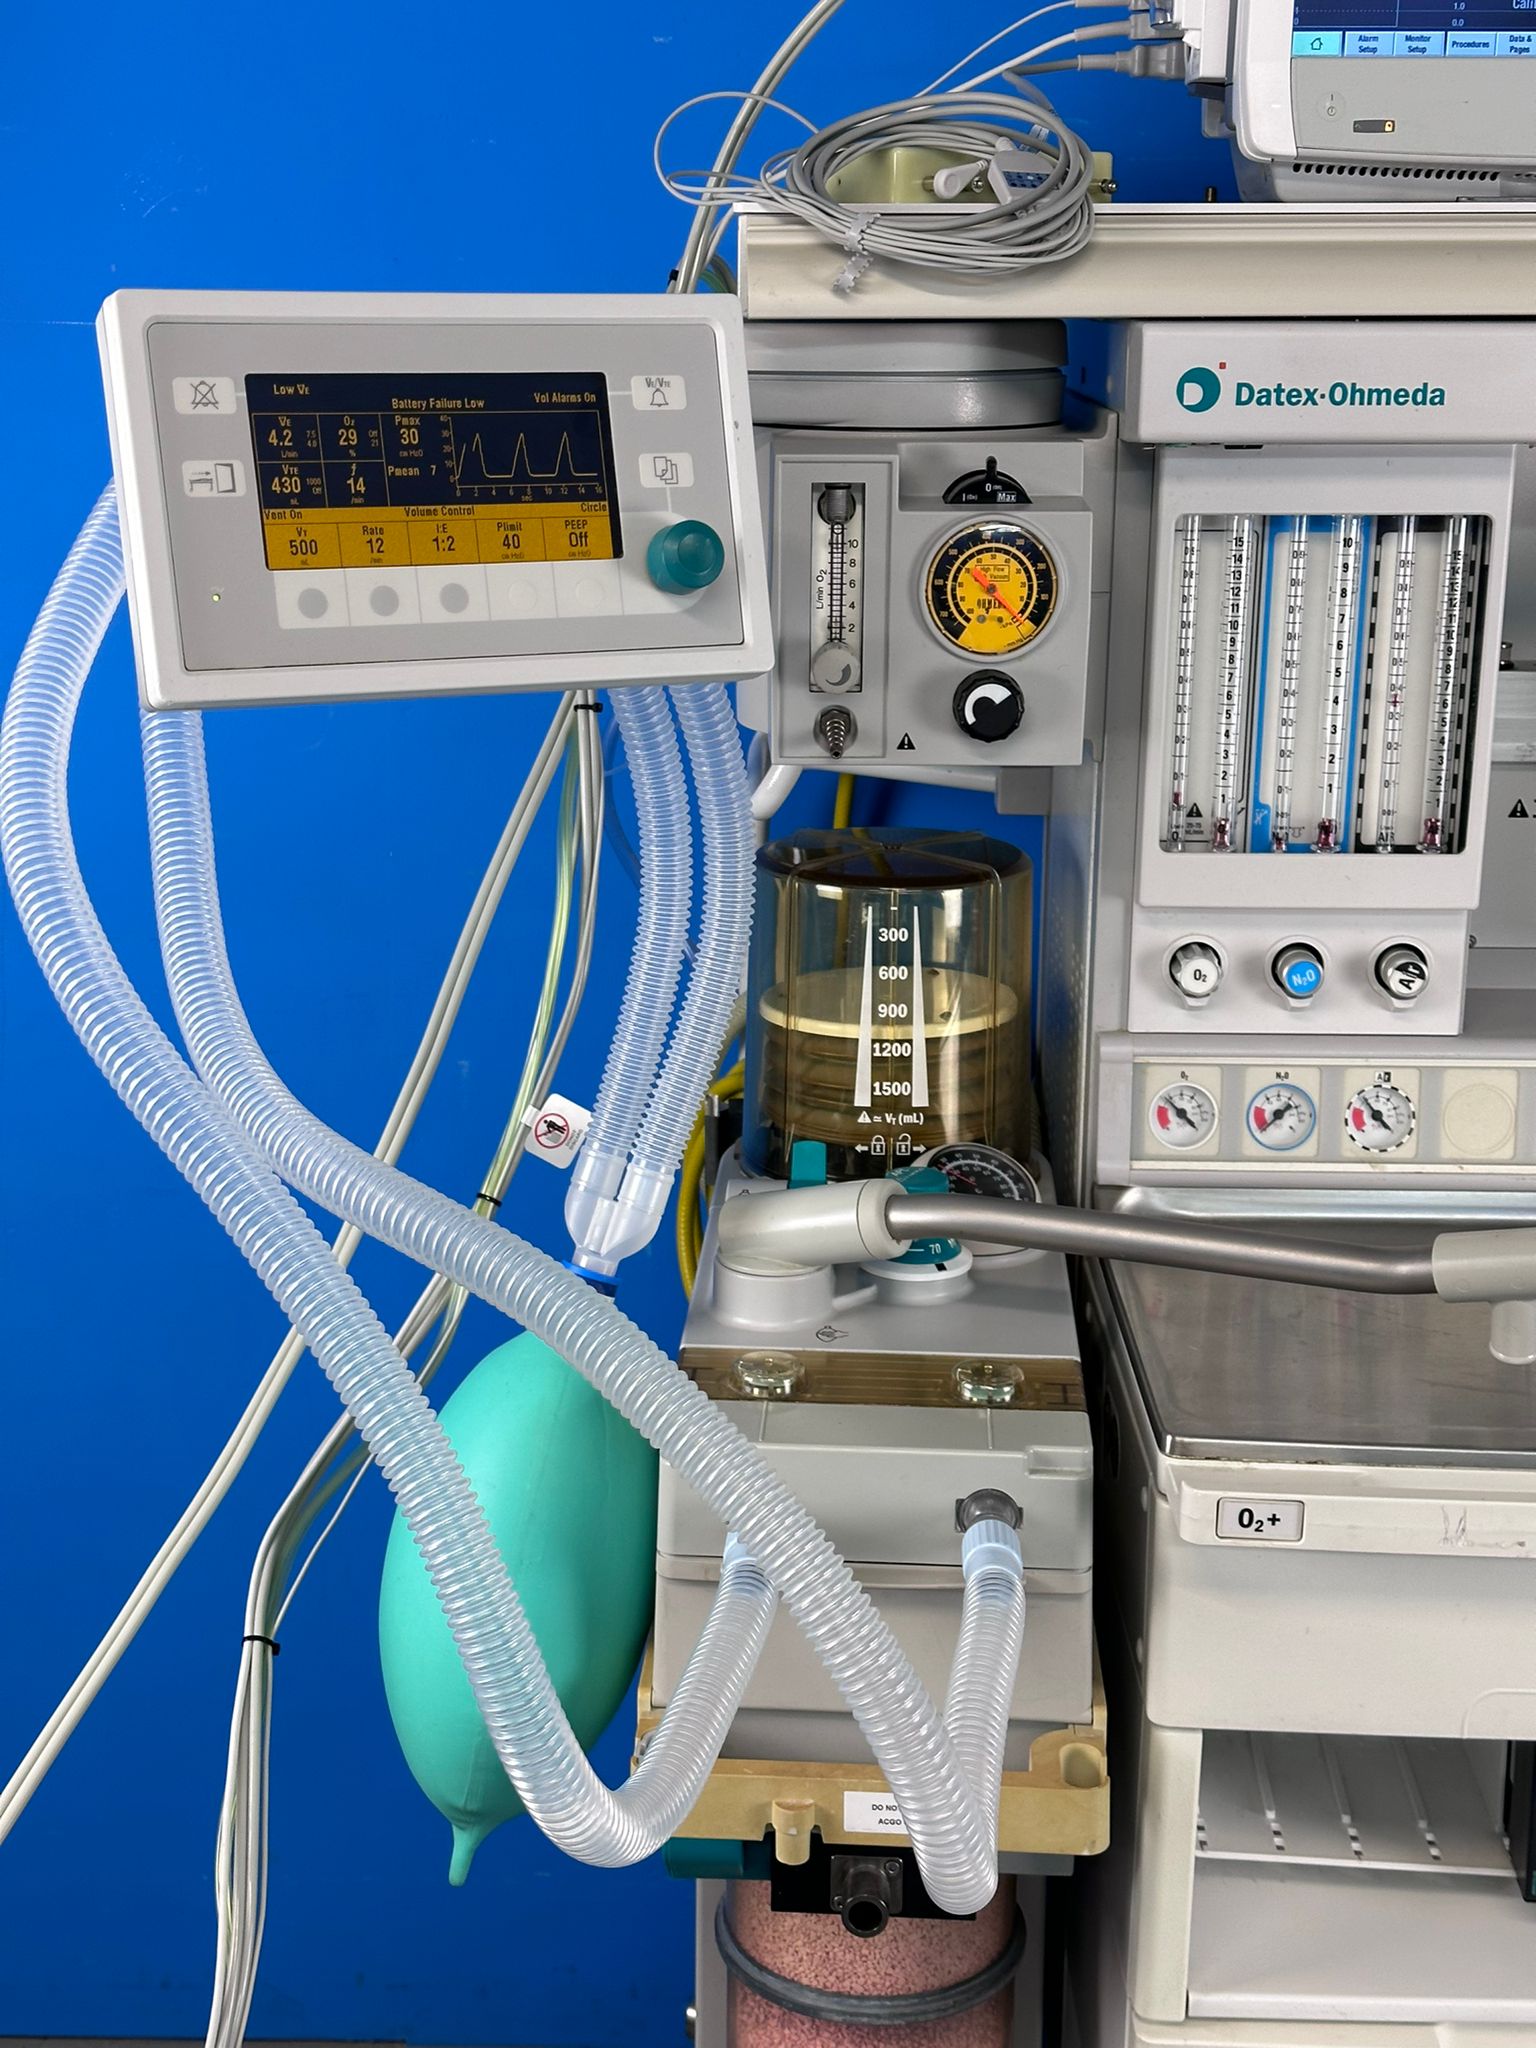  Aestiva 5 is a flexible system, allowing you to customize the anesthesia and ventilation flow. 